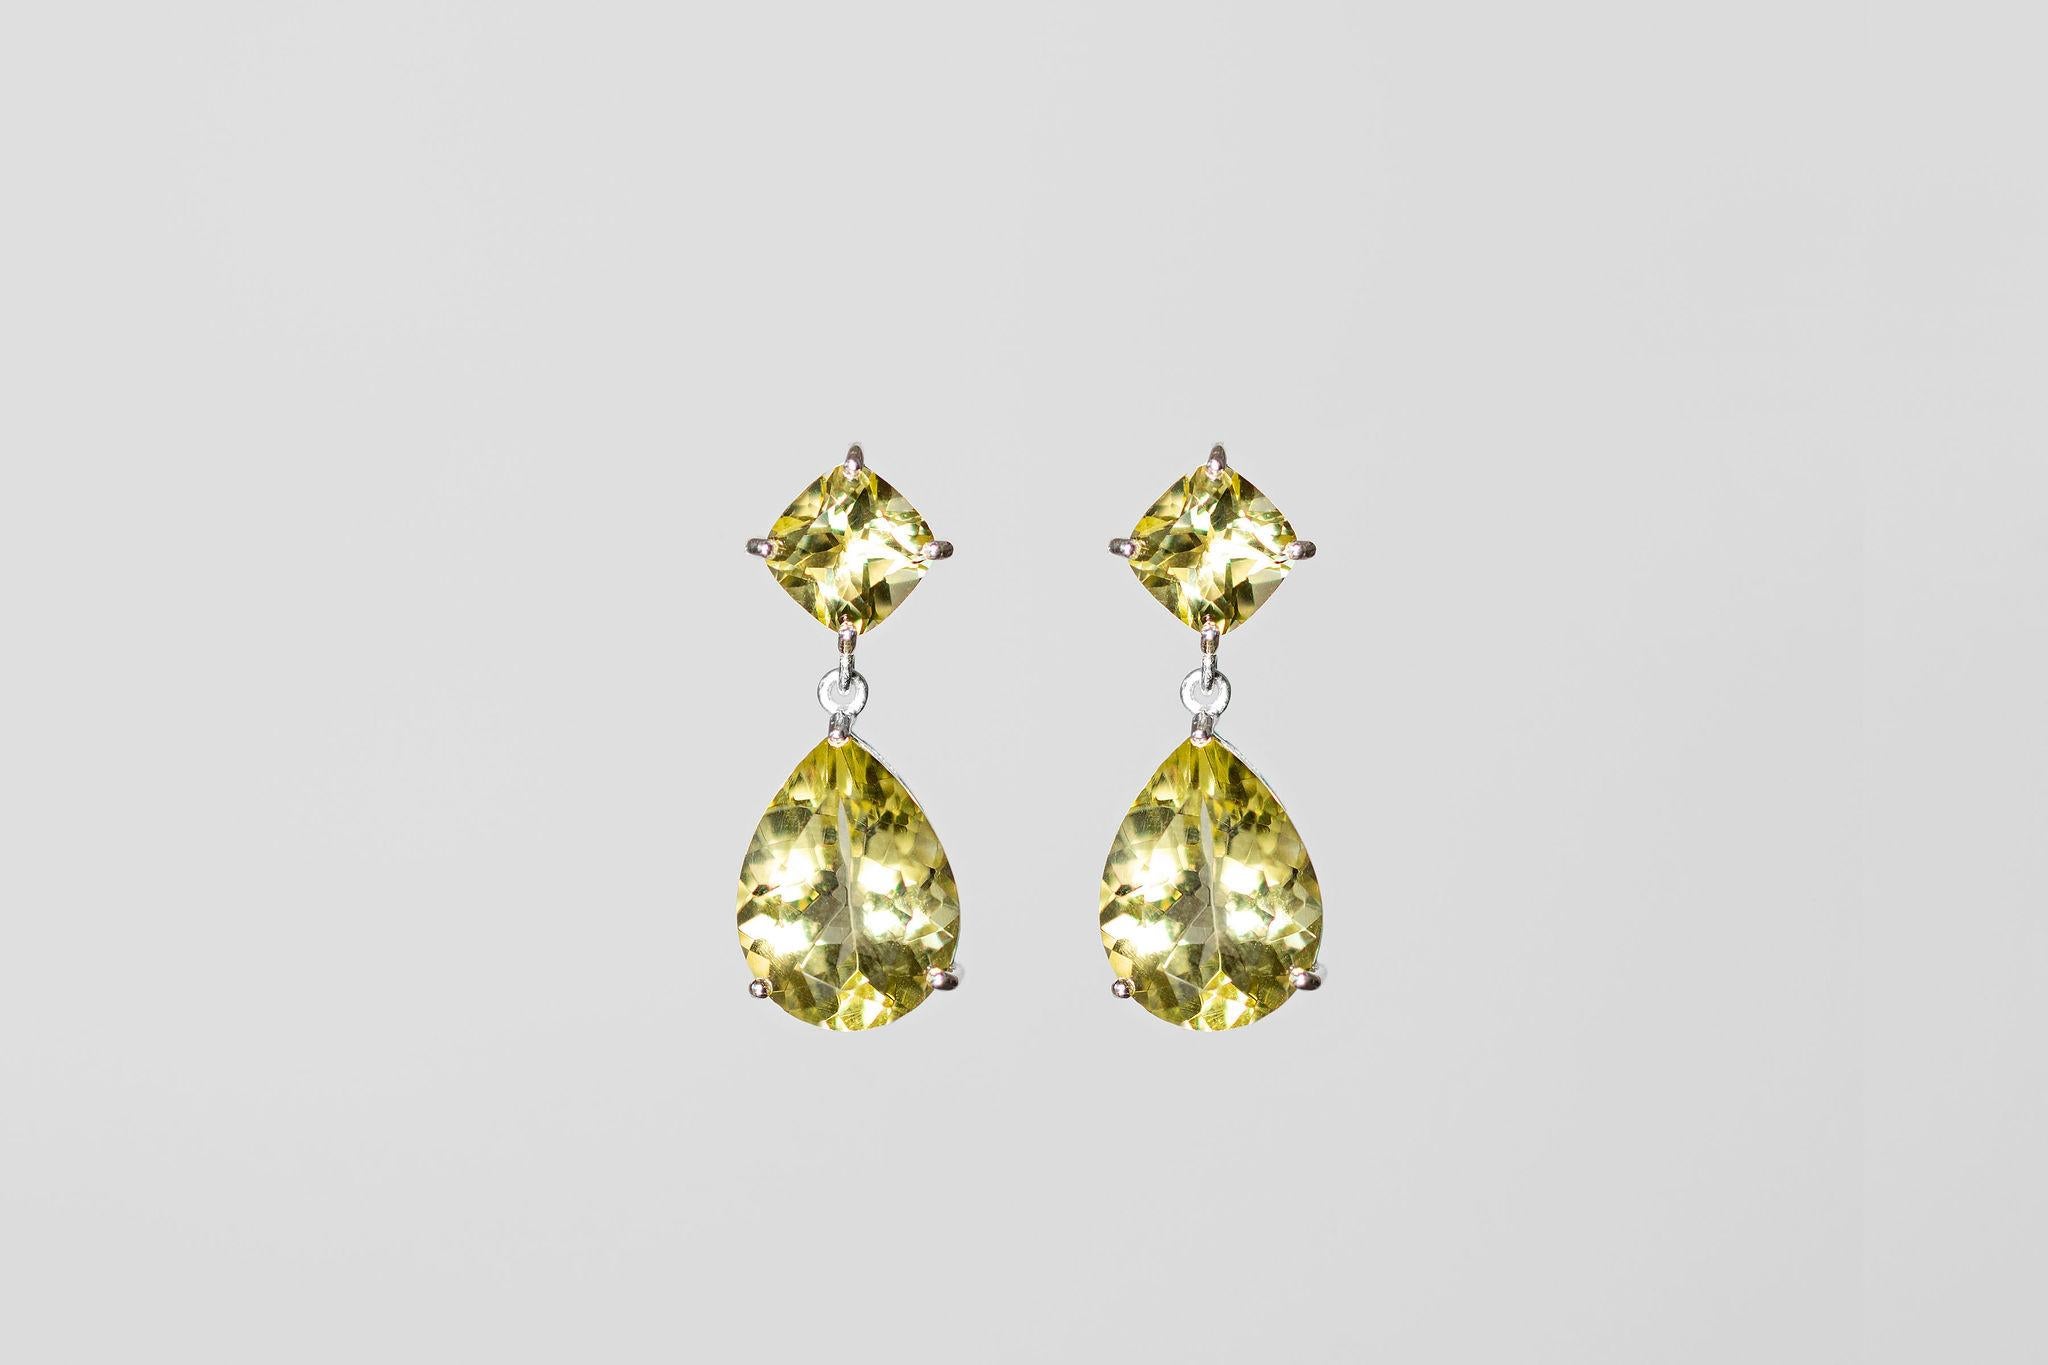 Elevate your style with these glamorous drop earrings. Handmade using recycled sterling silver and Lemon Quartz Amethysts. The pear-shaped stone is 6 carats, and the square top stone is 1ct. They are exceptionally well cut and crafted using upcycled